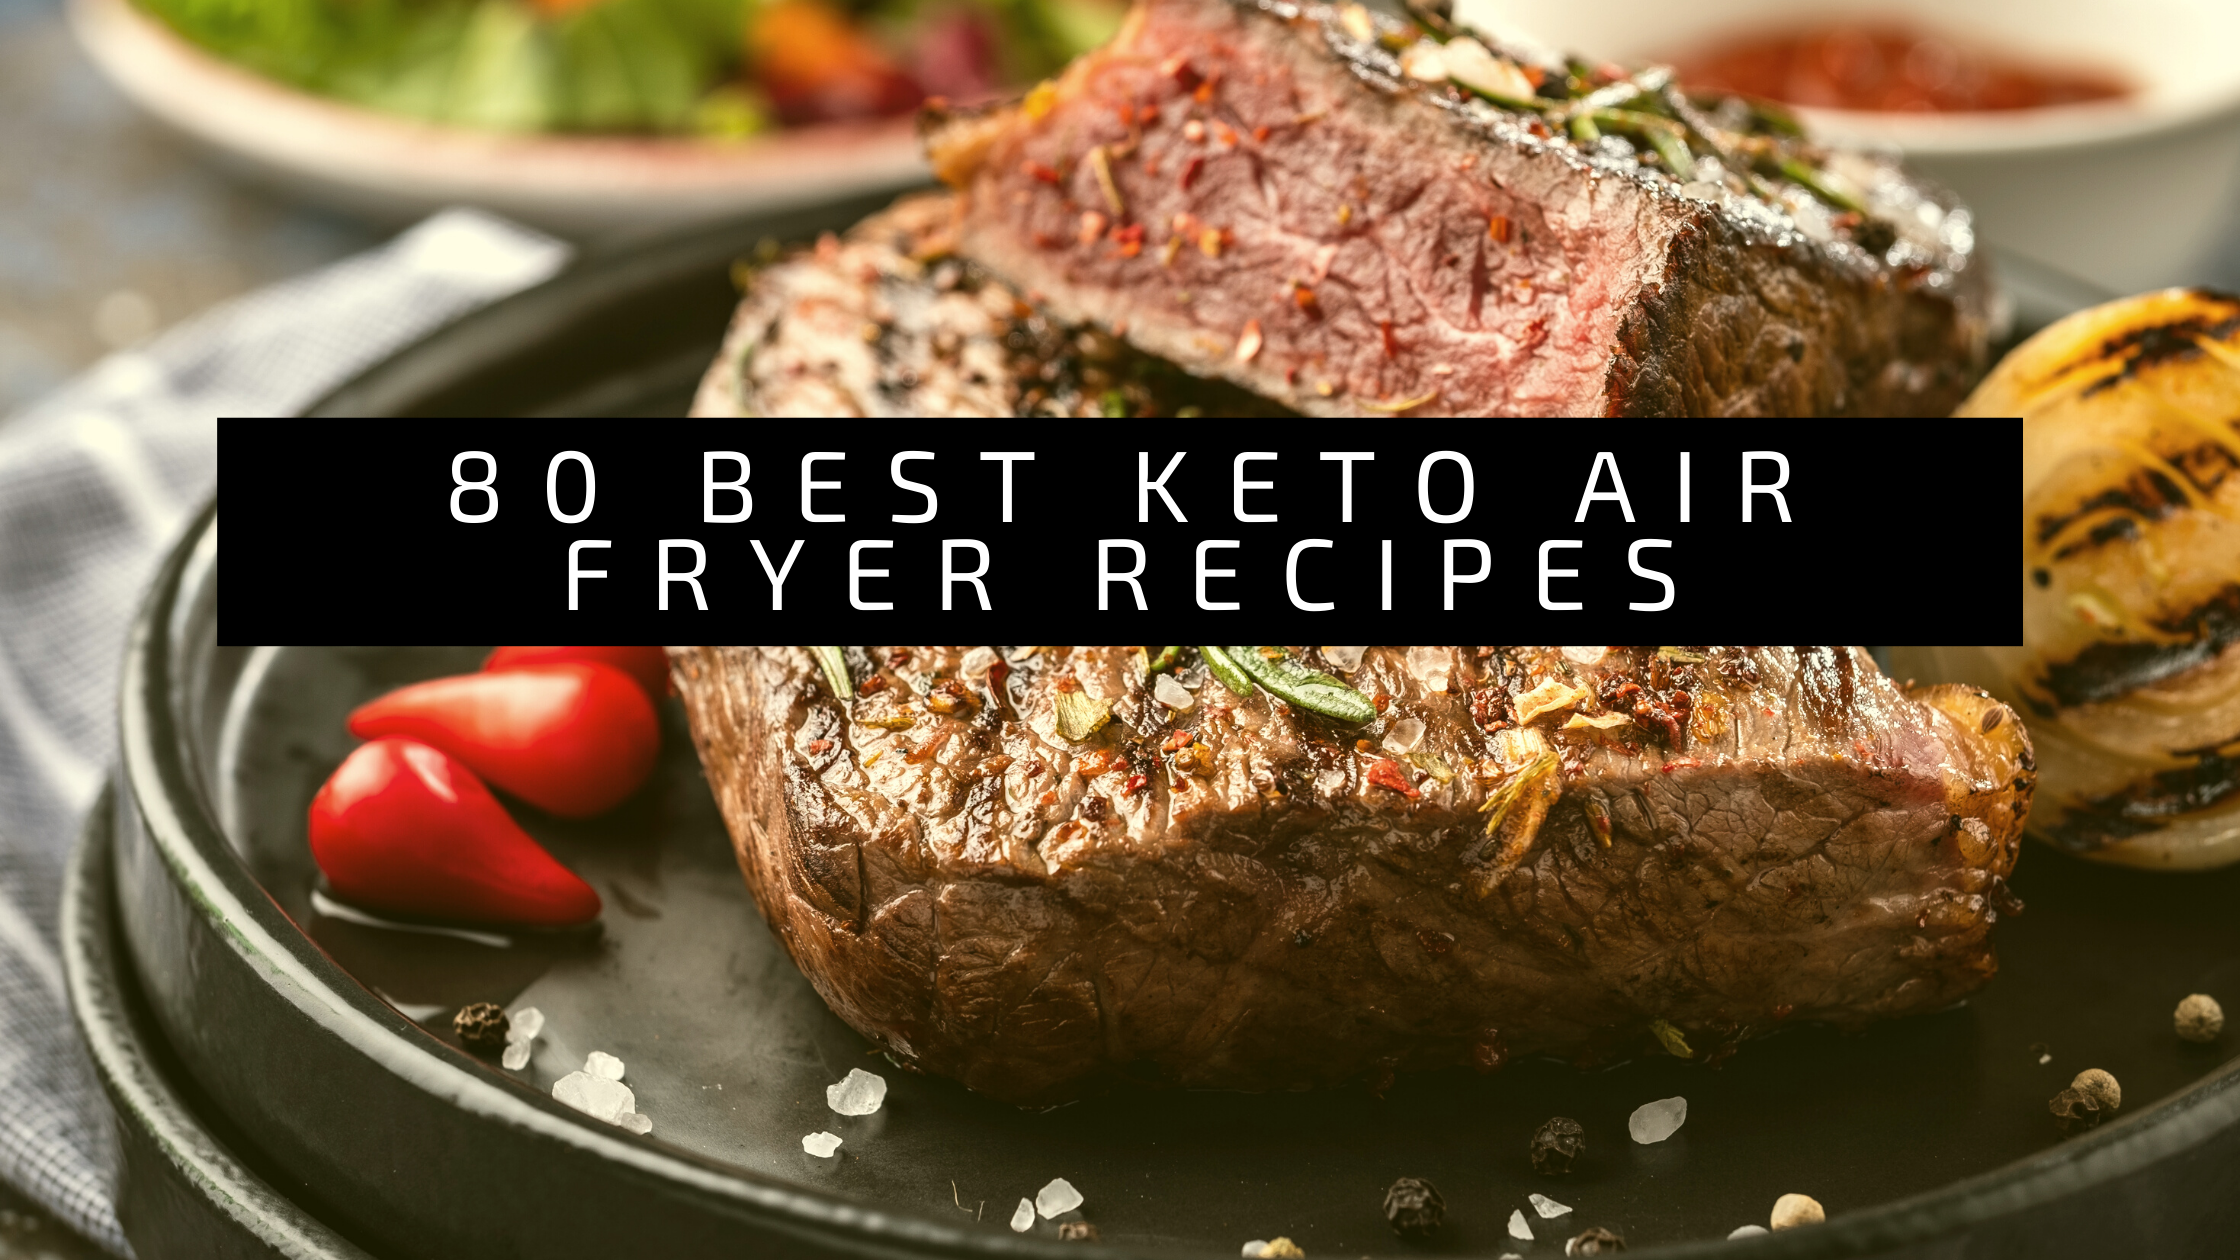 40 Family-Friendly Keto Air Fryer Recipes for Quick and Delicious Meals 1